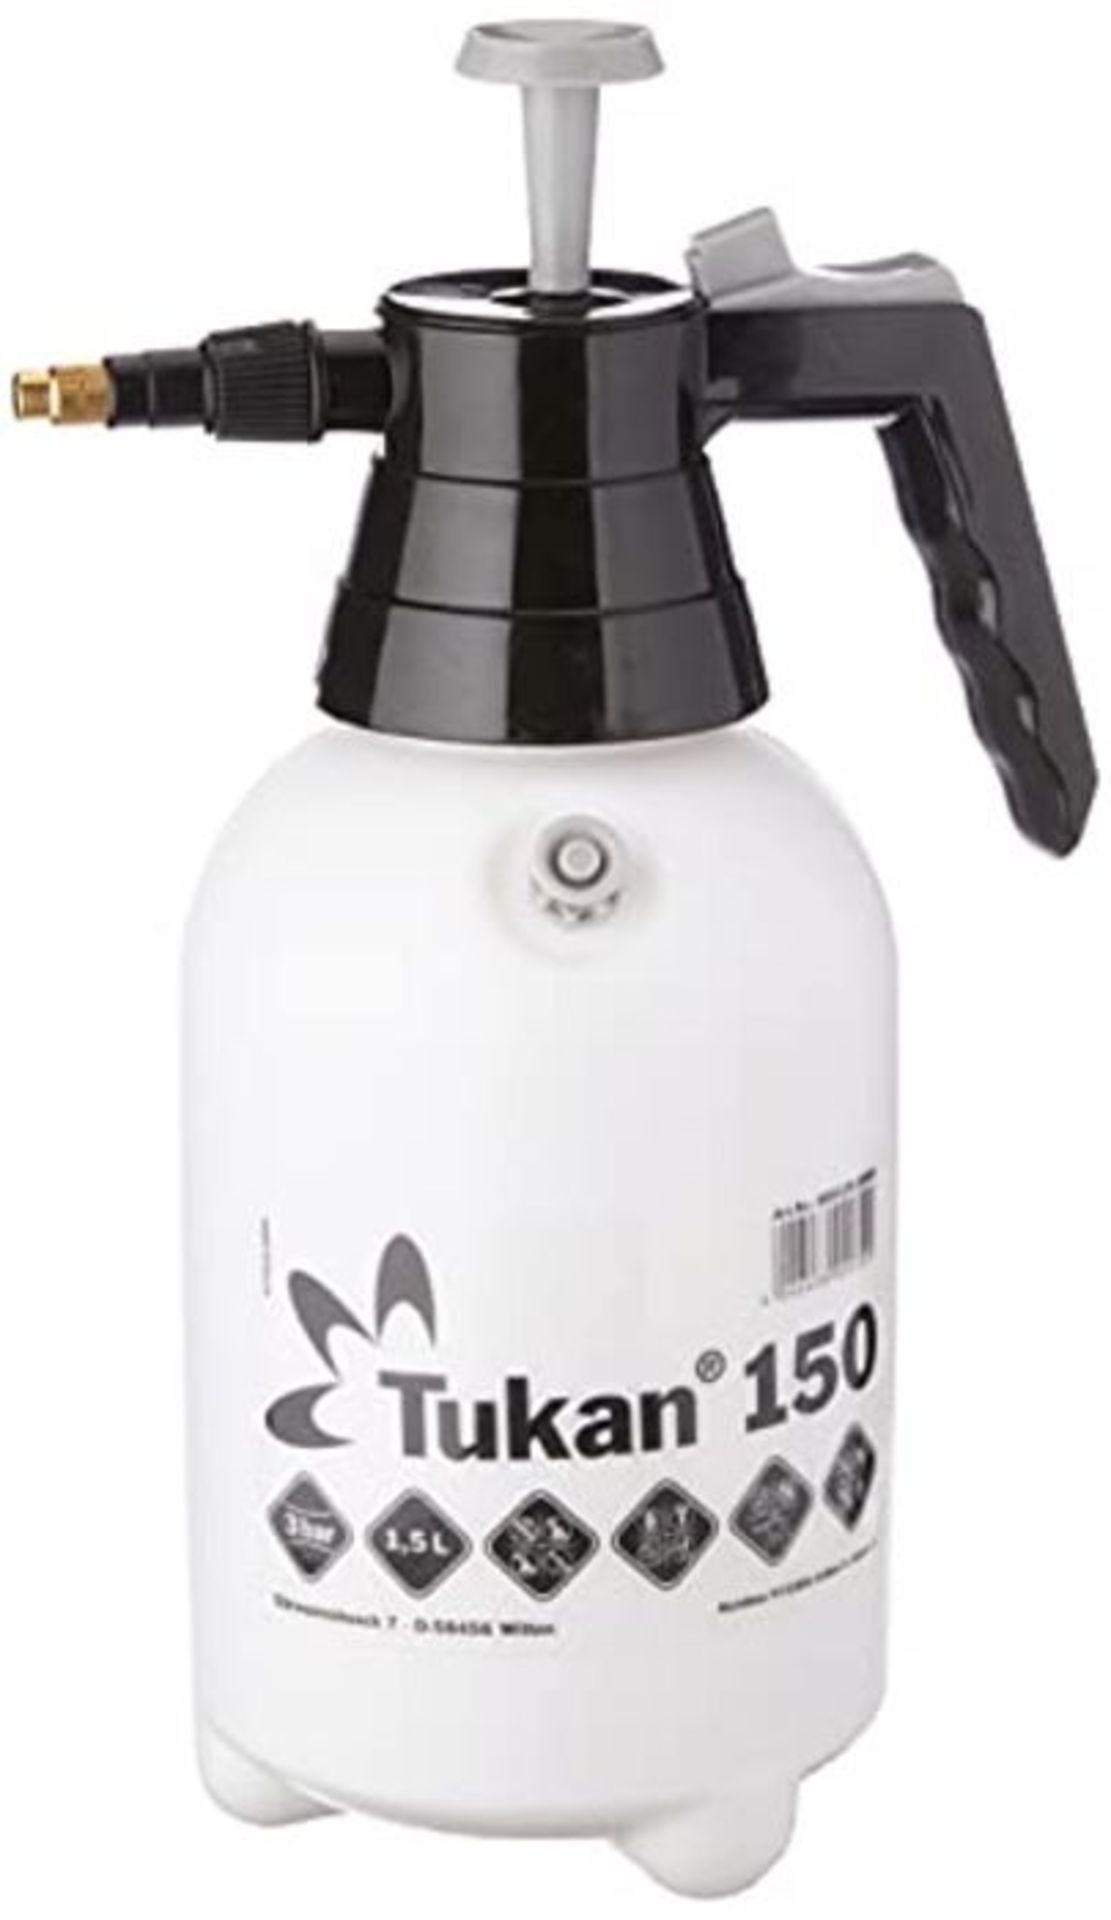 Tukan 000129.0000 150, 1.5 Sprayer with Adjustable Brass Nozzle and Pressure Valve